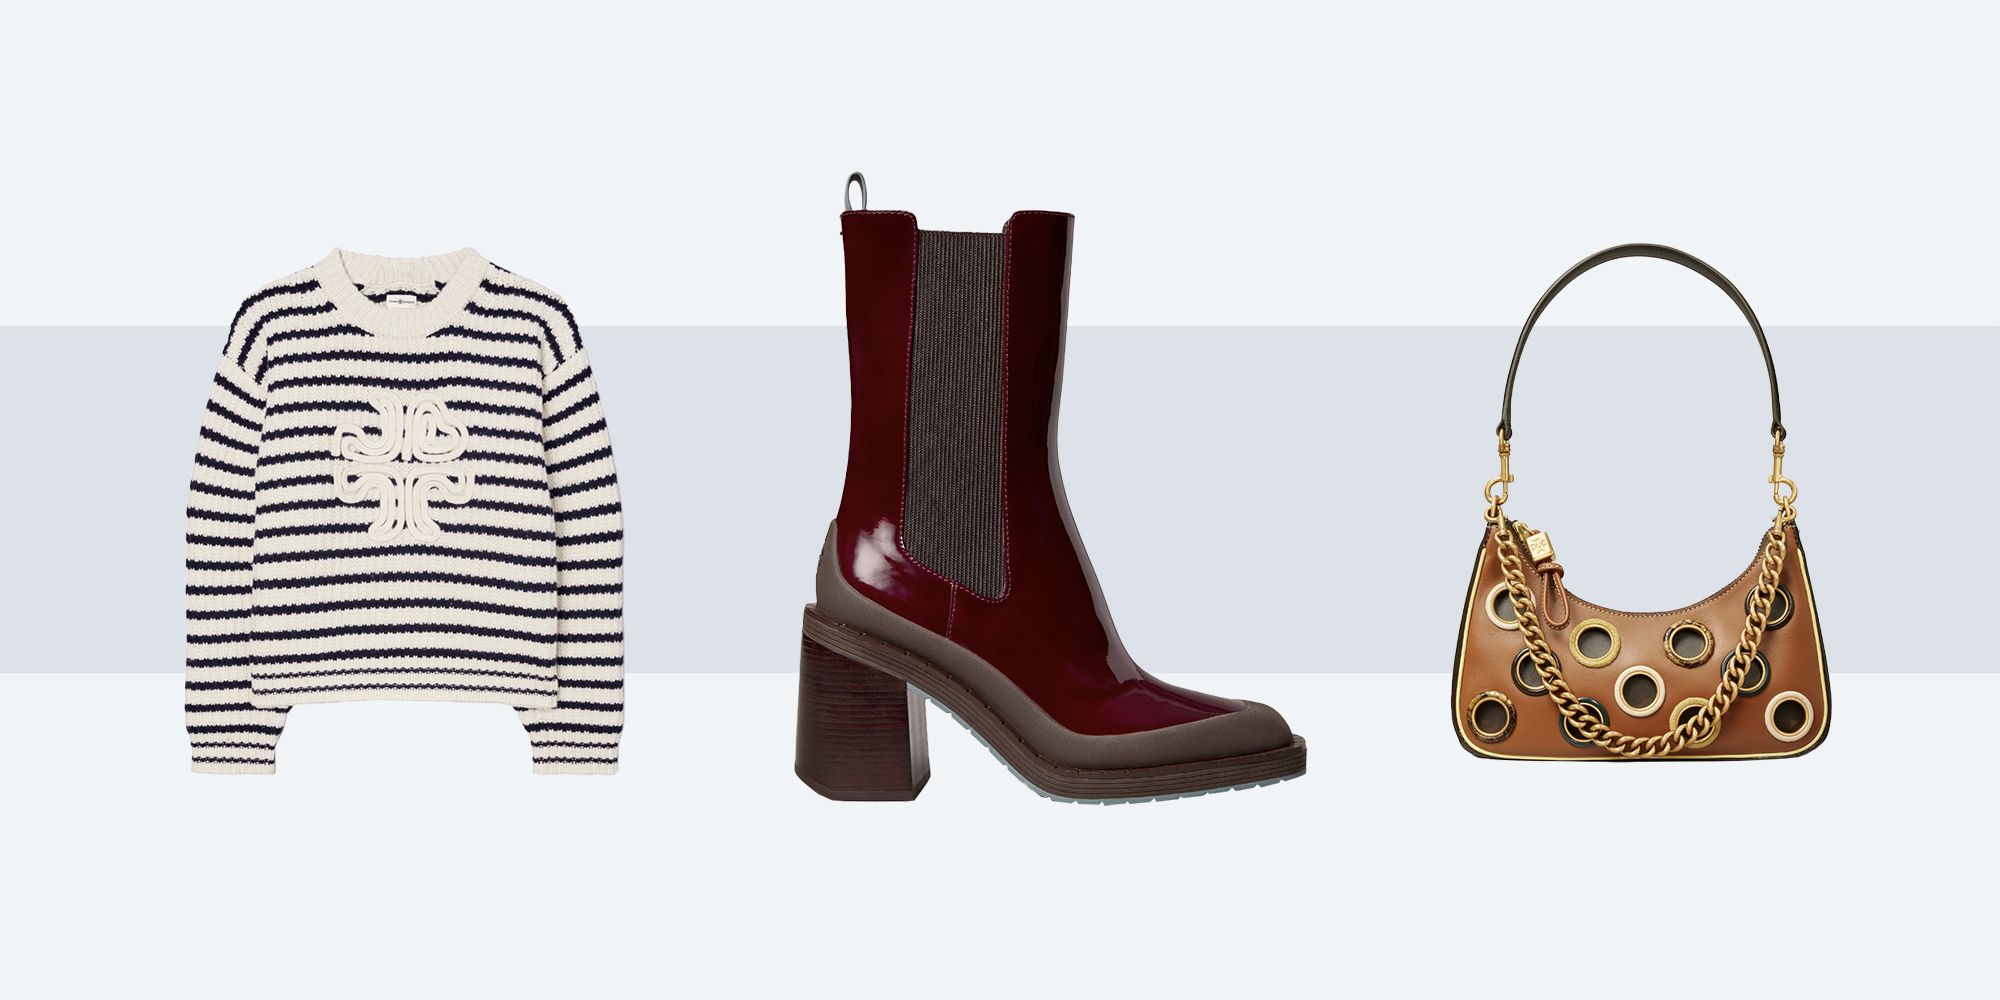 Tory Burch Fall Event Sale 2022: 13 Best Pieces to Shop